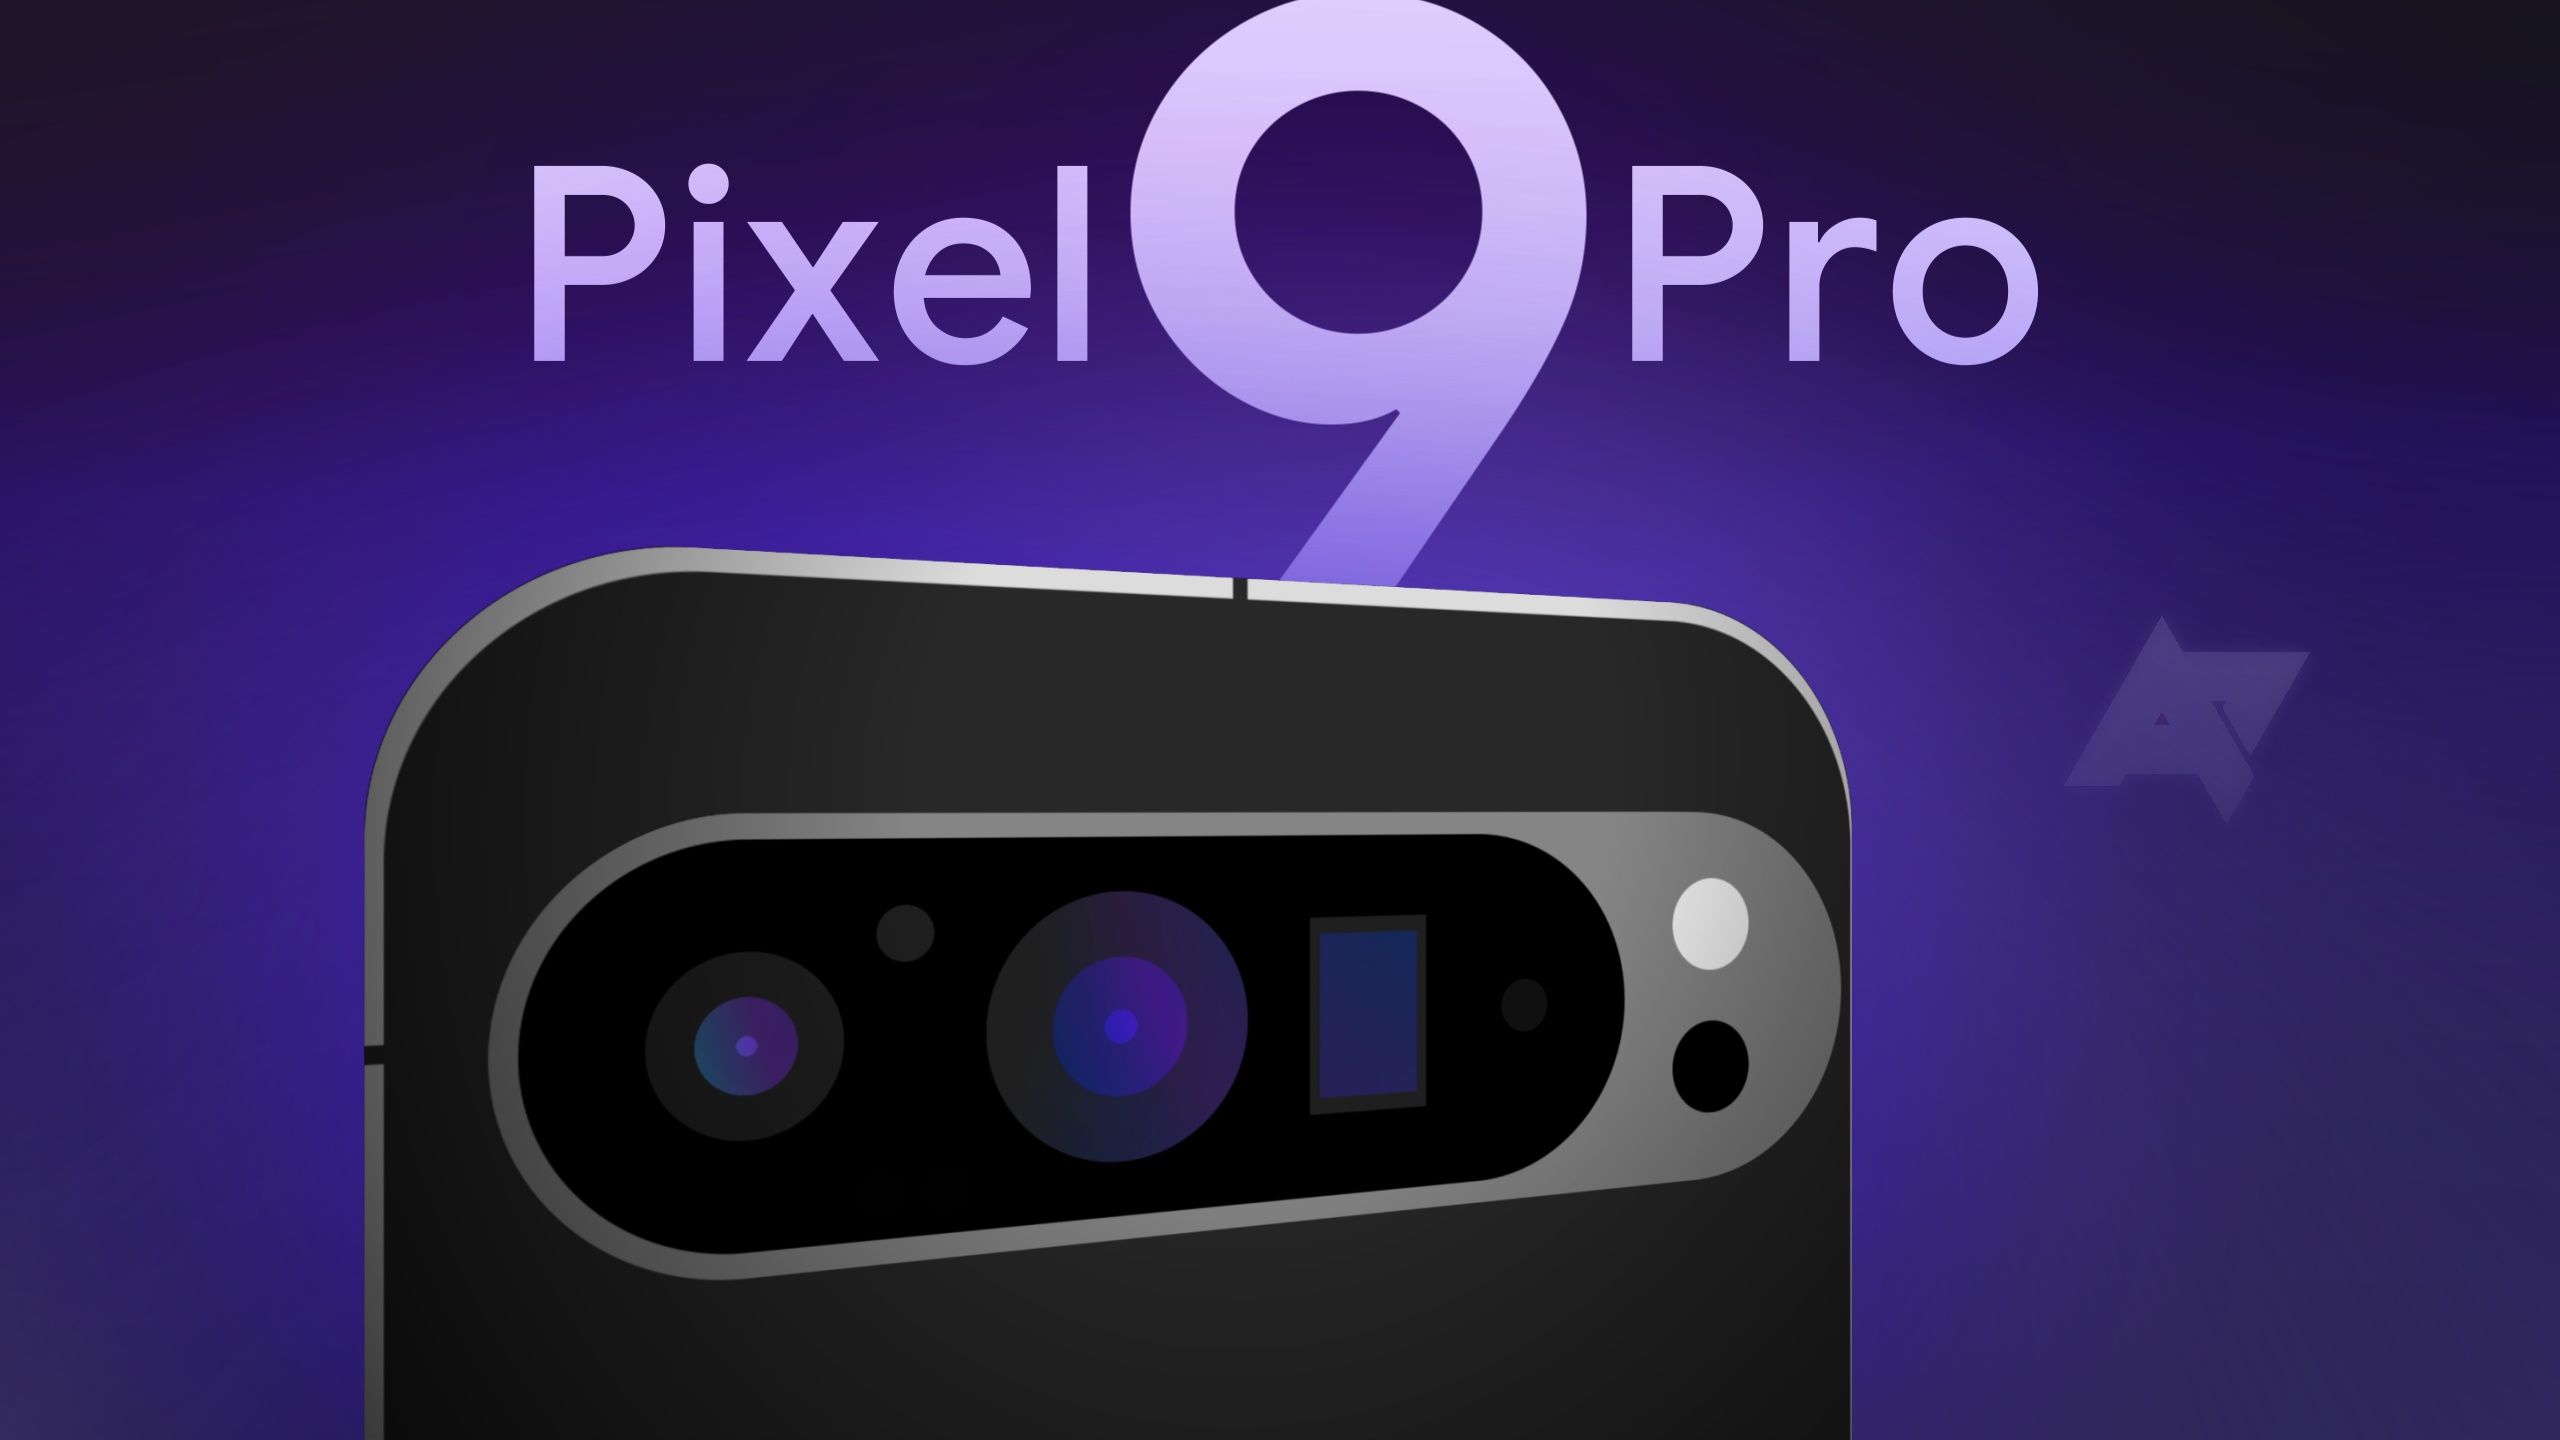 An image showing the Pixel 9 Pro on top of the purple color